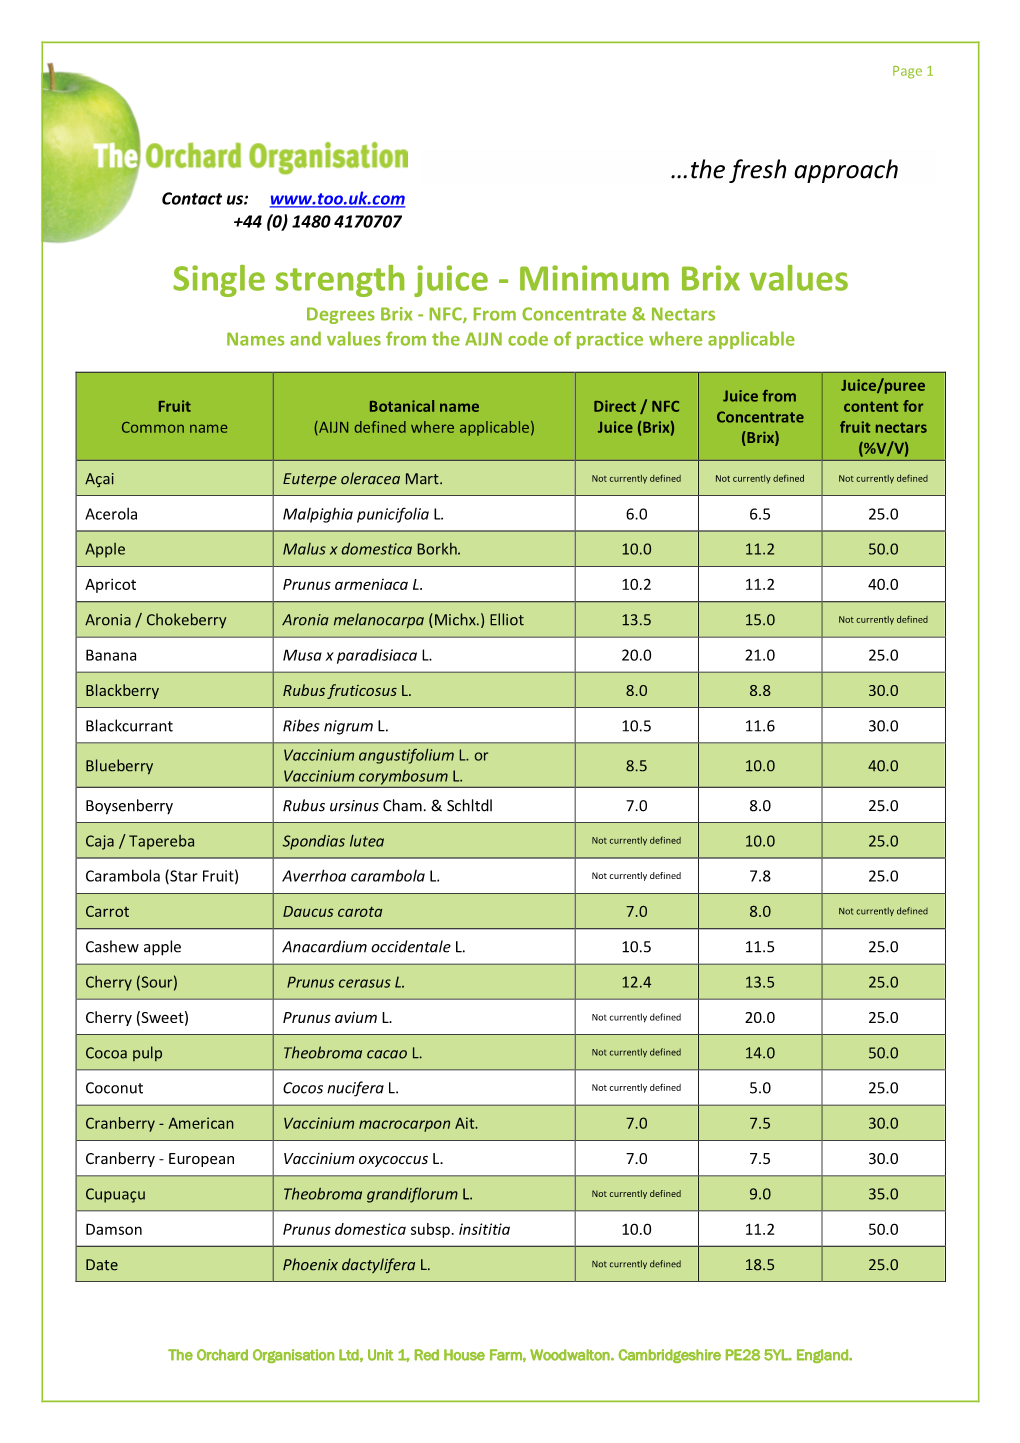 Single Strength Juice - Minimum Brix Values Degrees Brix - NFC, from Concentrate & Nectars Names and Values from the AIJN Code of Practice Where Applicable